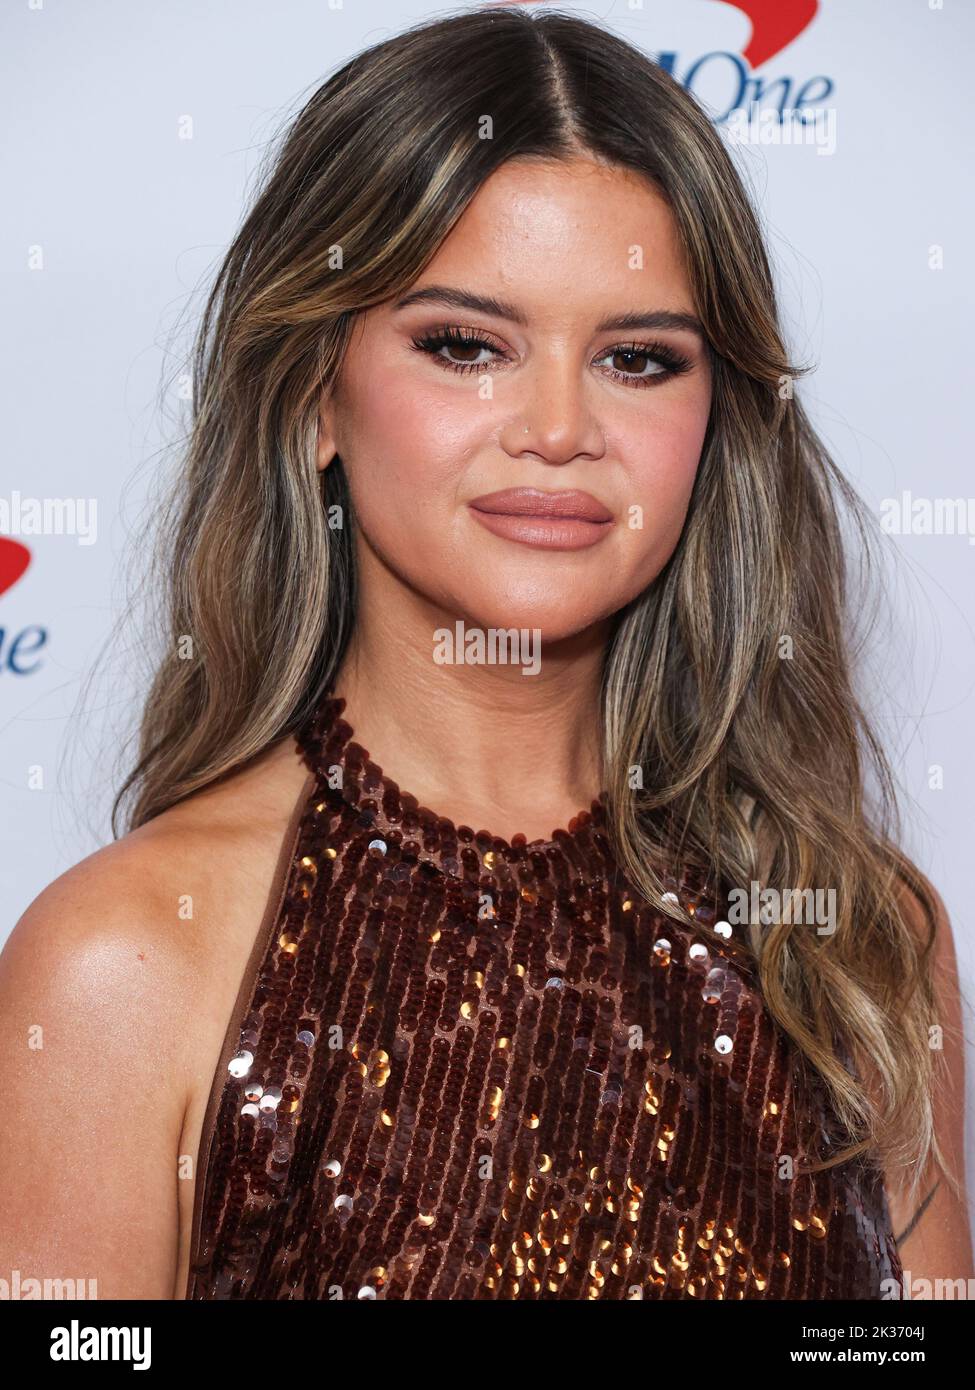 Las Vegas, United States. 24th Sep, 2022. LAS VEGAS, NEVADA, USA - SEPTEMBER 24: Maren Morris poses in the press room at the 2022 iHeartRadio Music Festival - Night 2 held at the T-Mobile Arena on September 24, 2022 in Las Vegas, Nevada, United States. (Photo by Xavier Collin/Image Press Agency) Credit: Image Press Agency/Alamy Live News Stock Photo